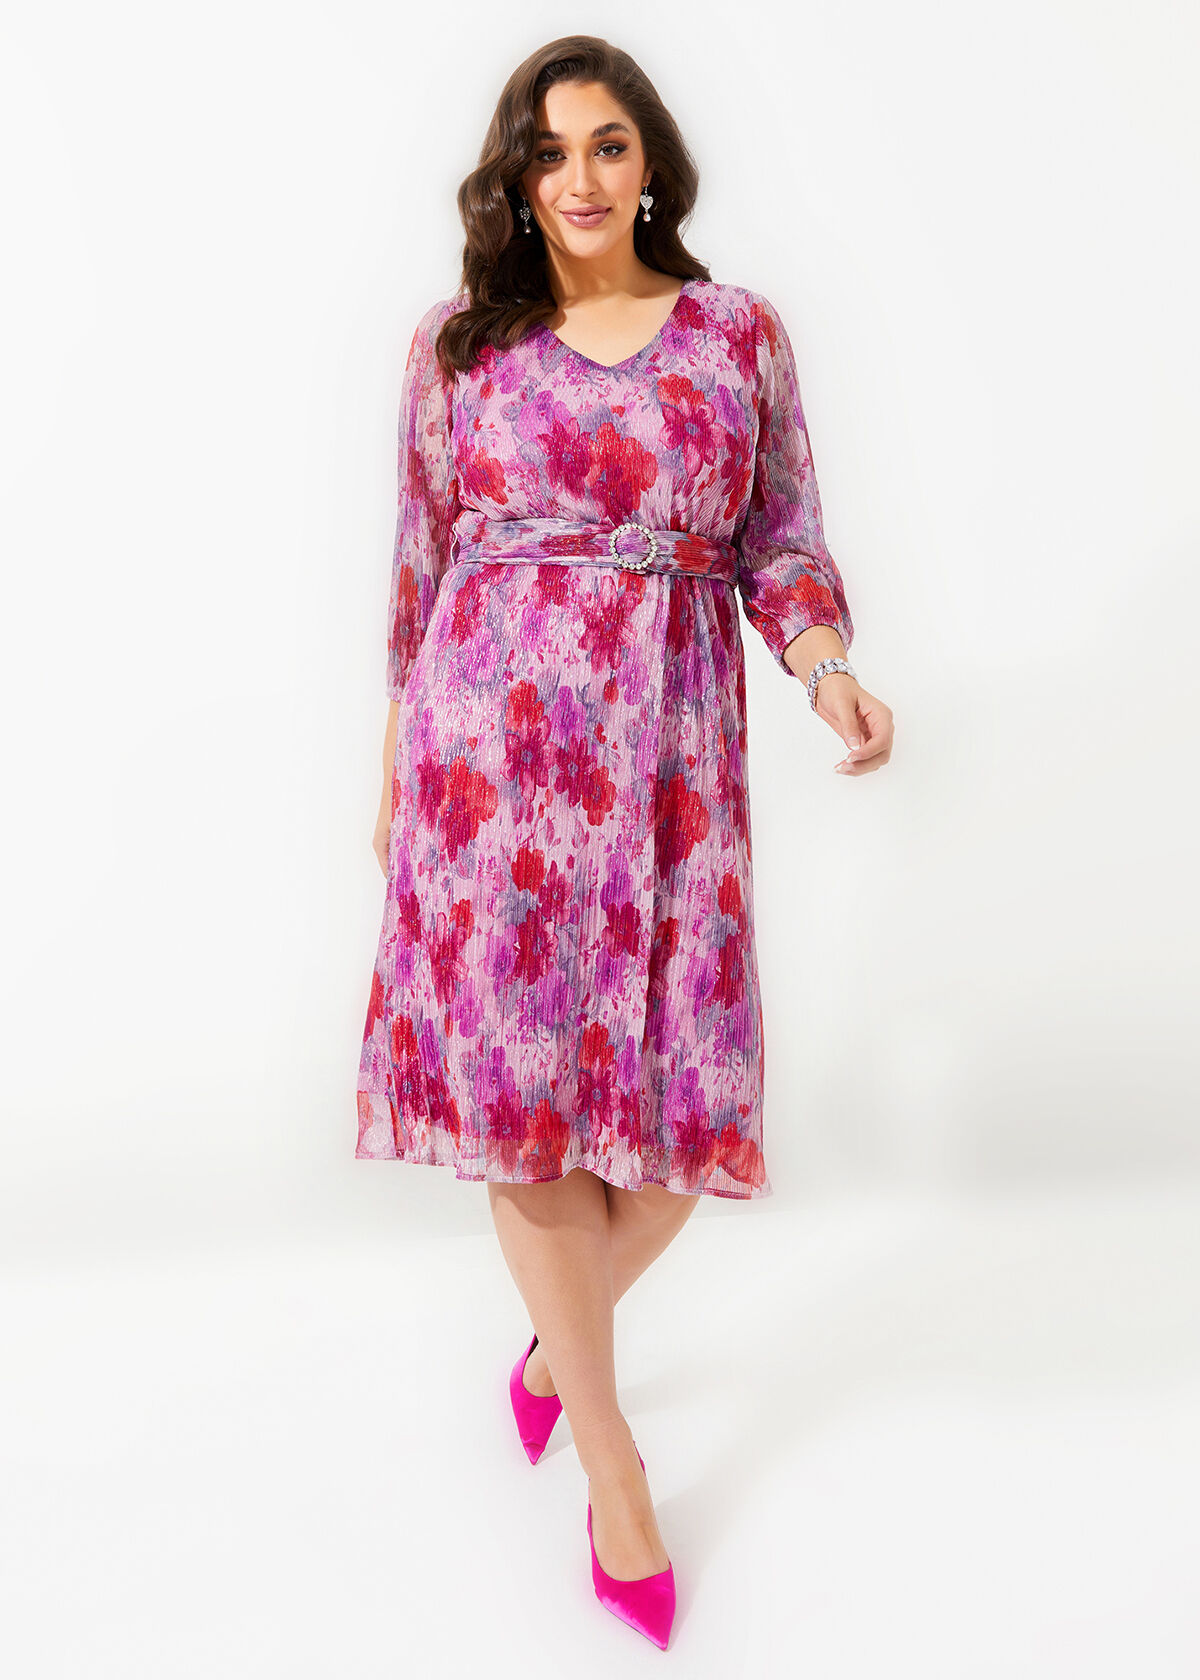 Plus Size Winter Party Dresses | Chic Lover